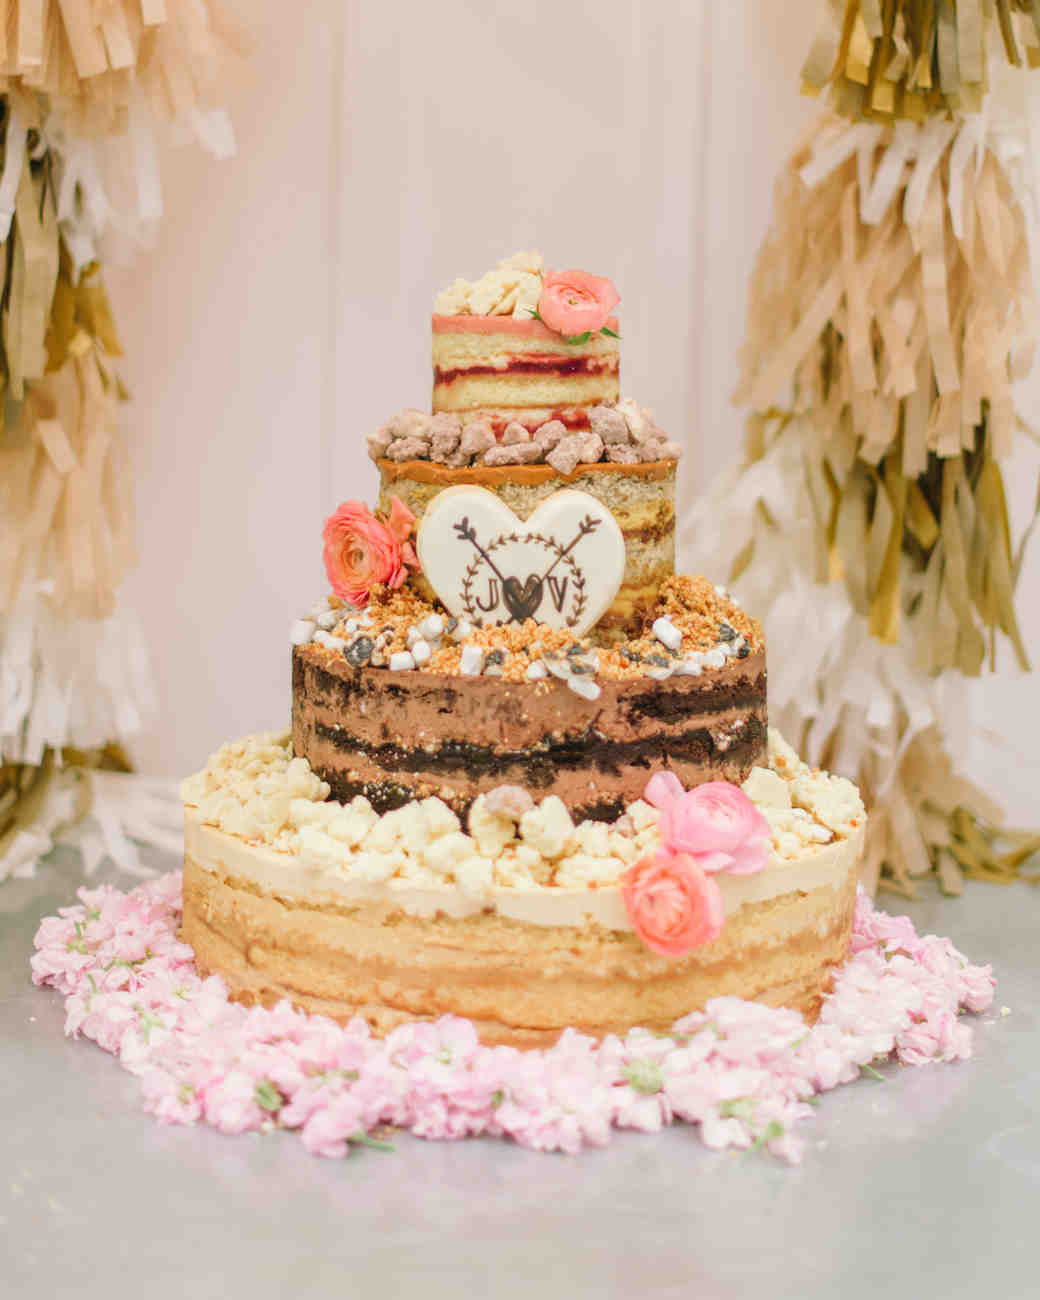 Naked cakes are popular amongst modern brides and grooms